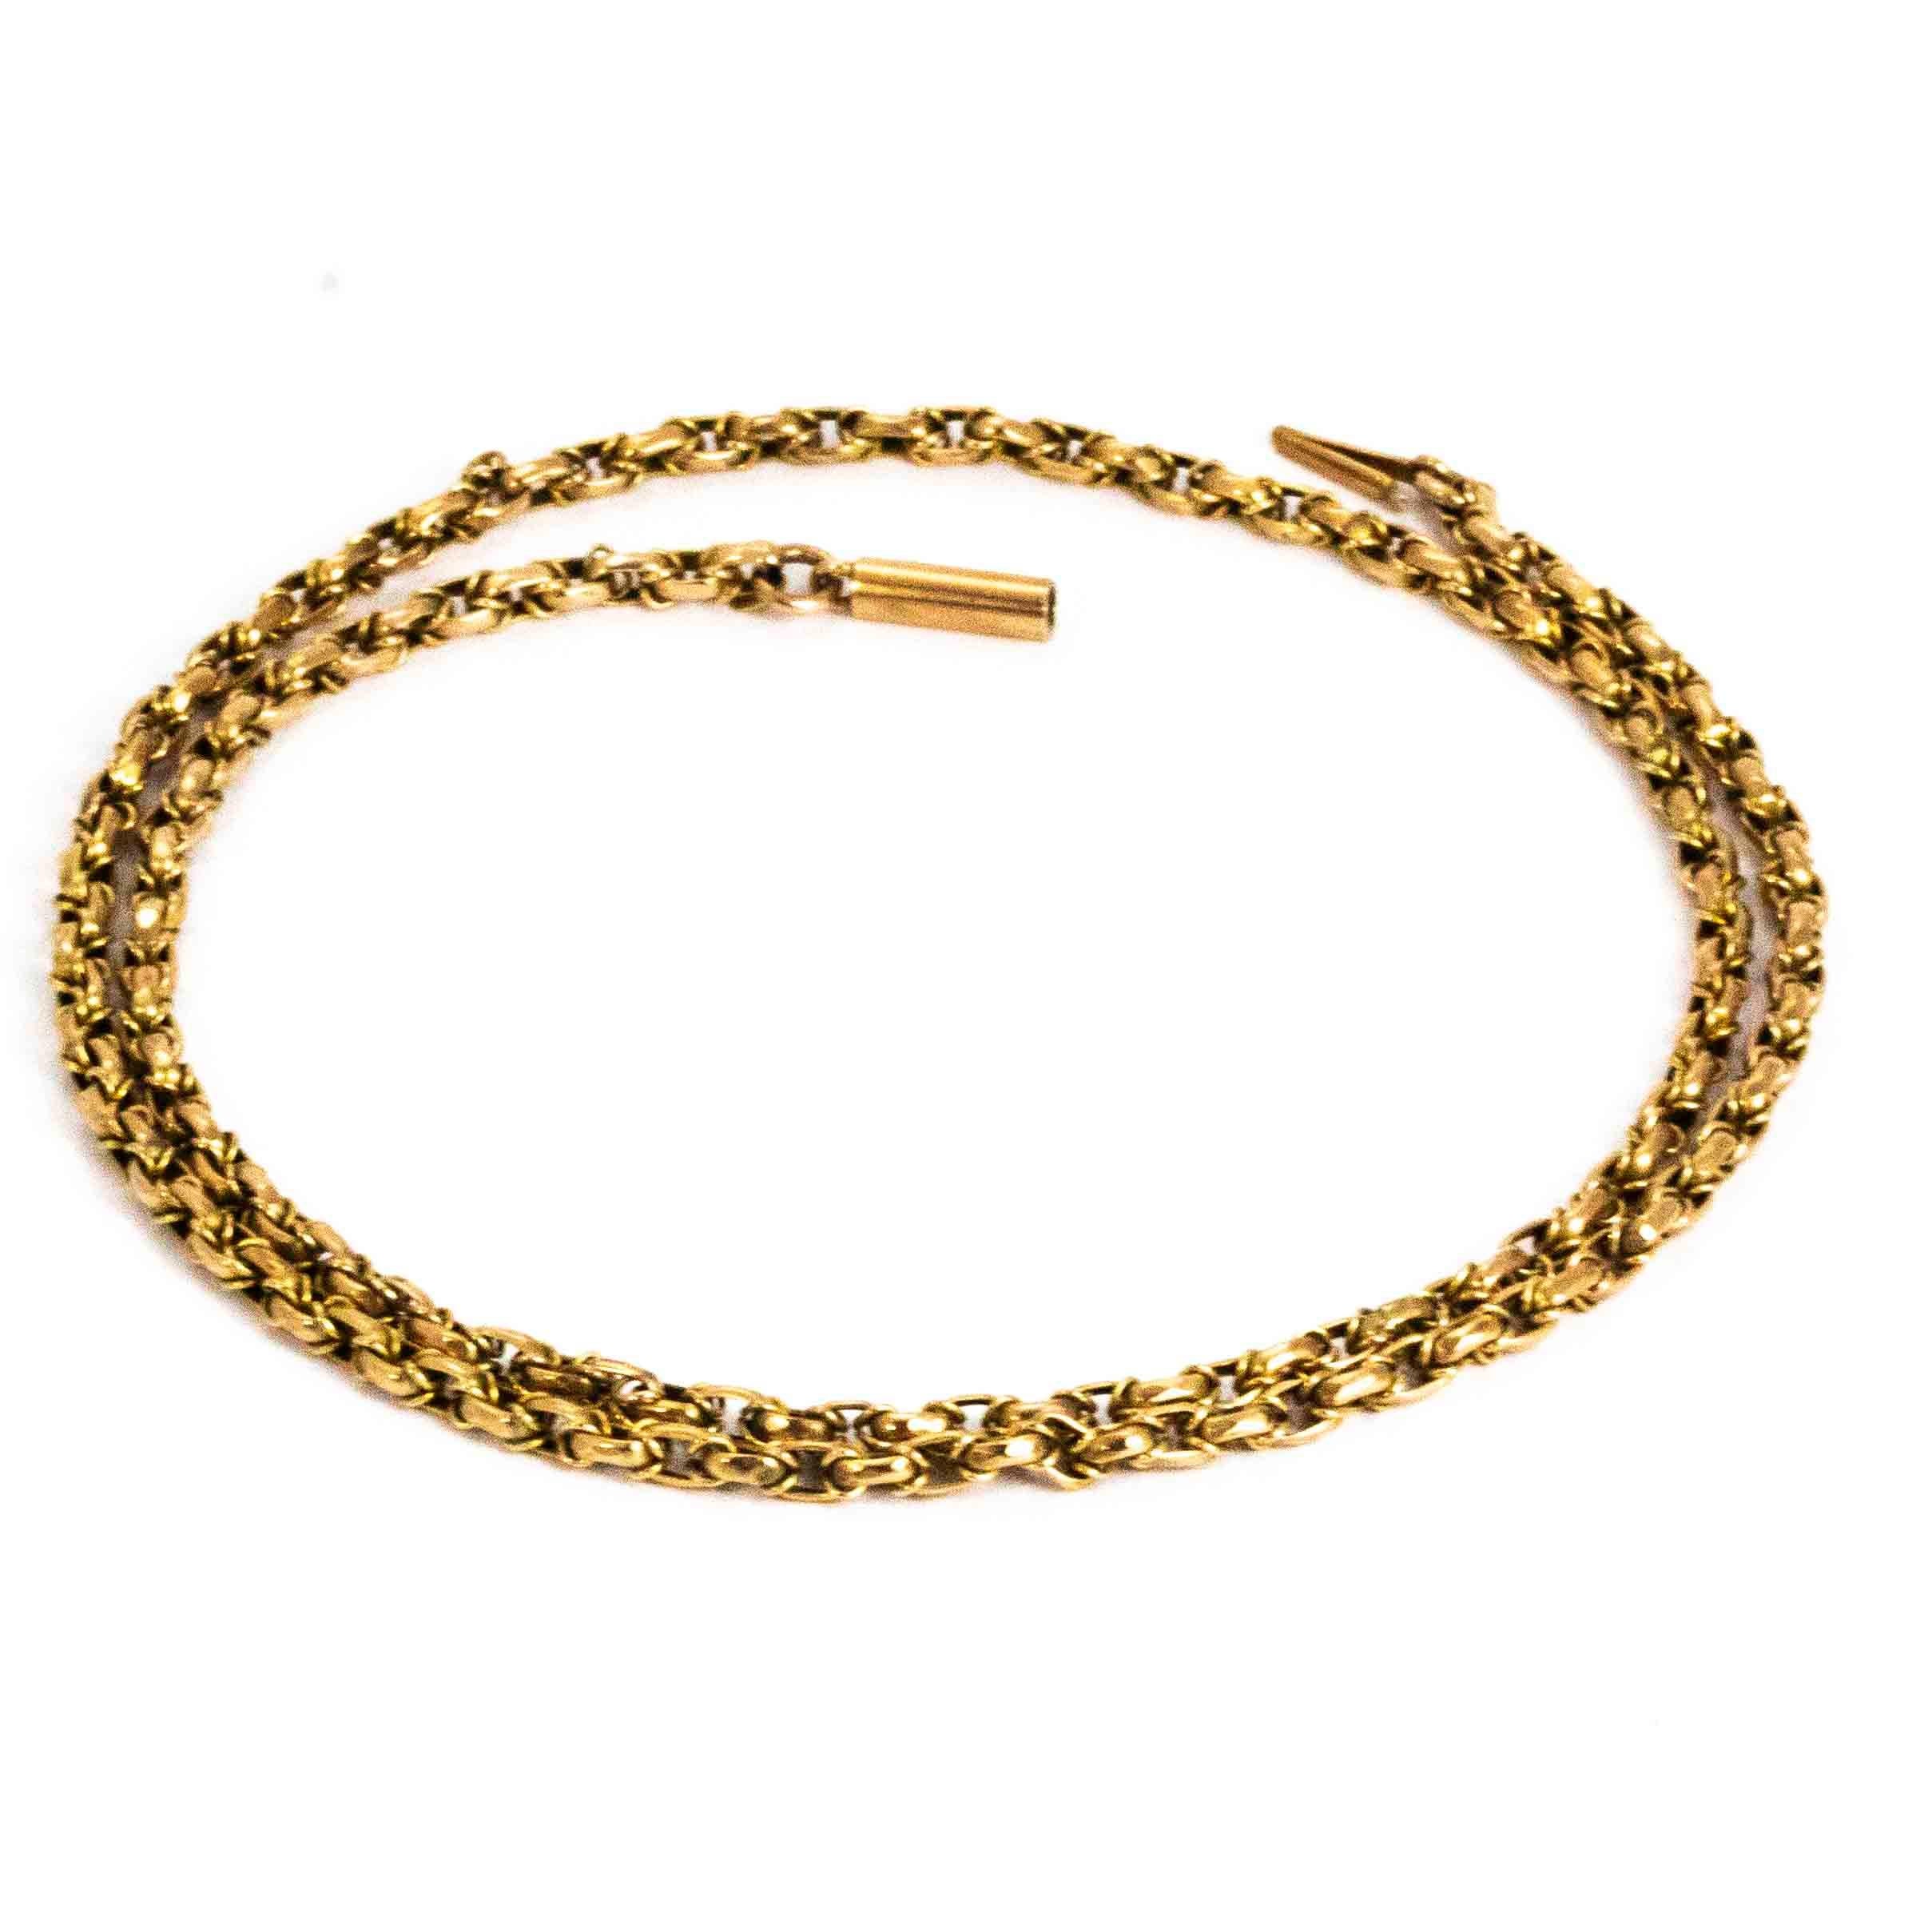 A beautiful antique chain necklace from the Victorian era, formed of superb fancy belcher links with a barrel and torpedo clasp. Modelled in 9 carat yellow gold.

Length: 44.5cm